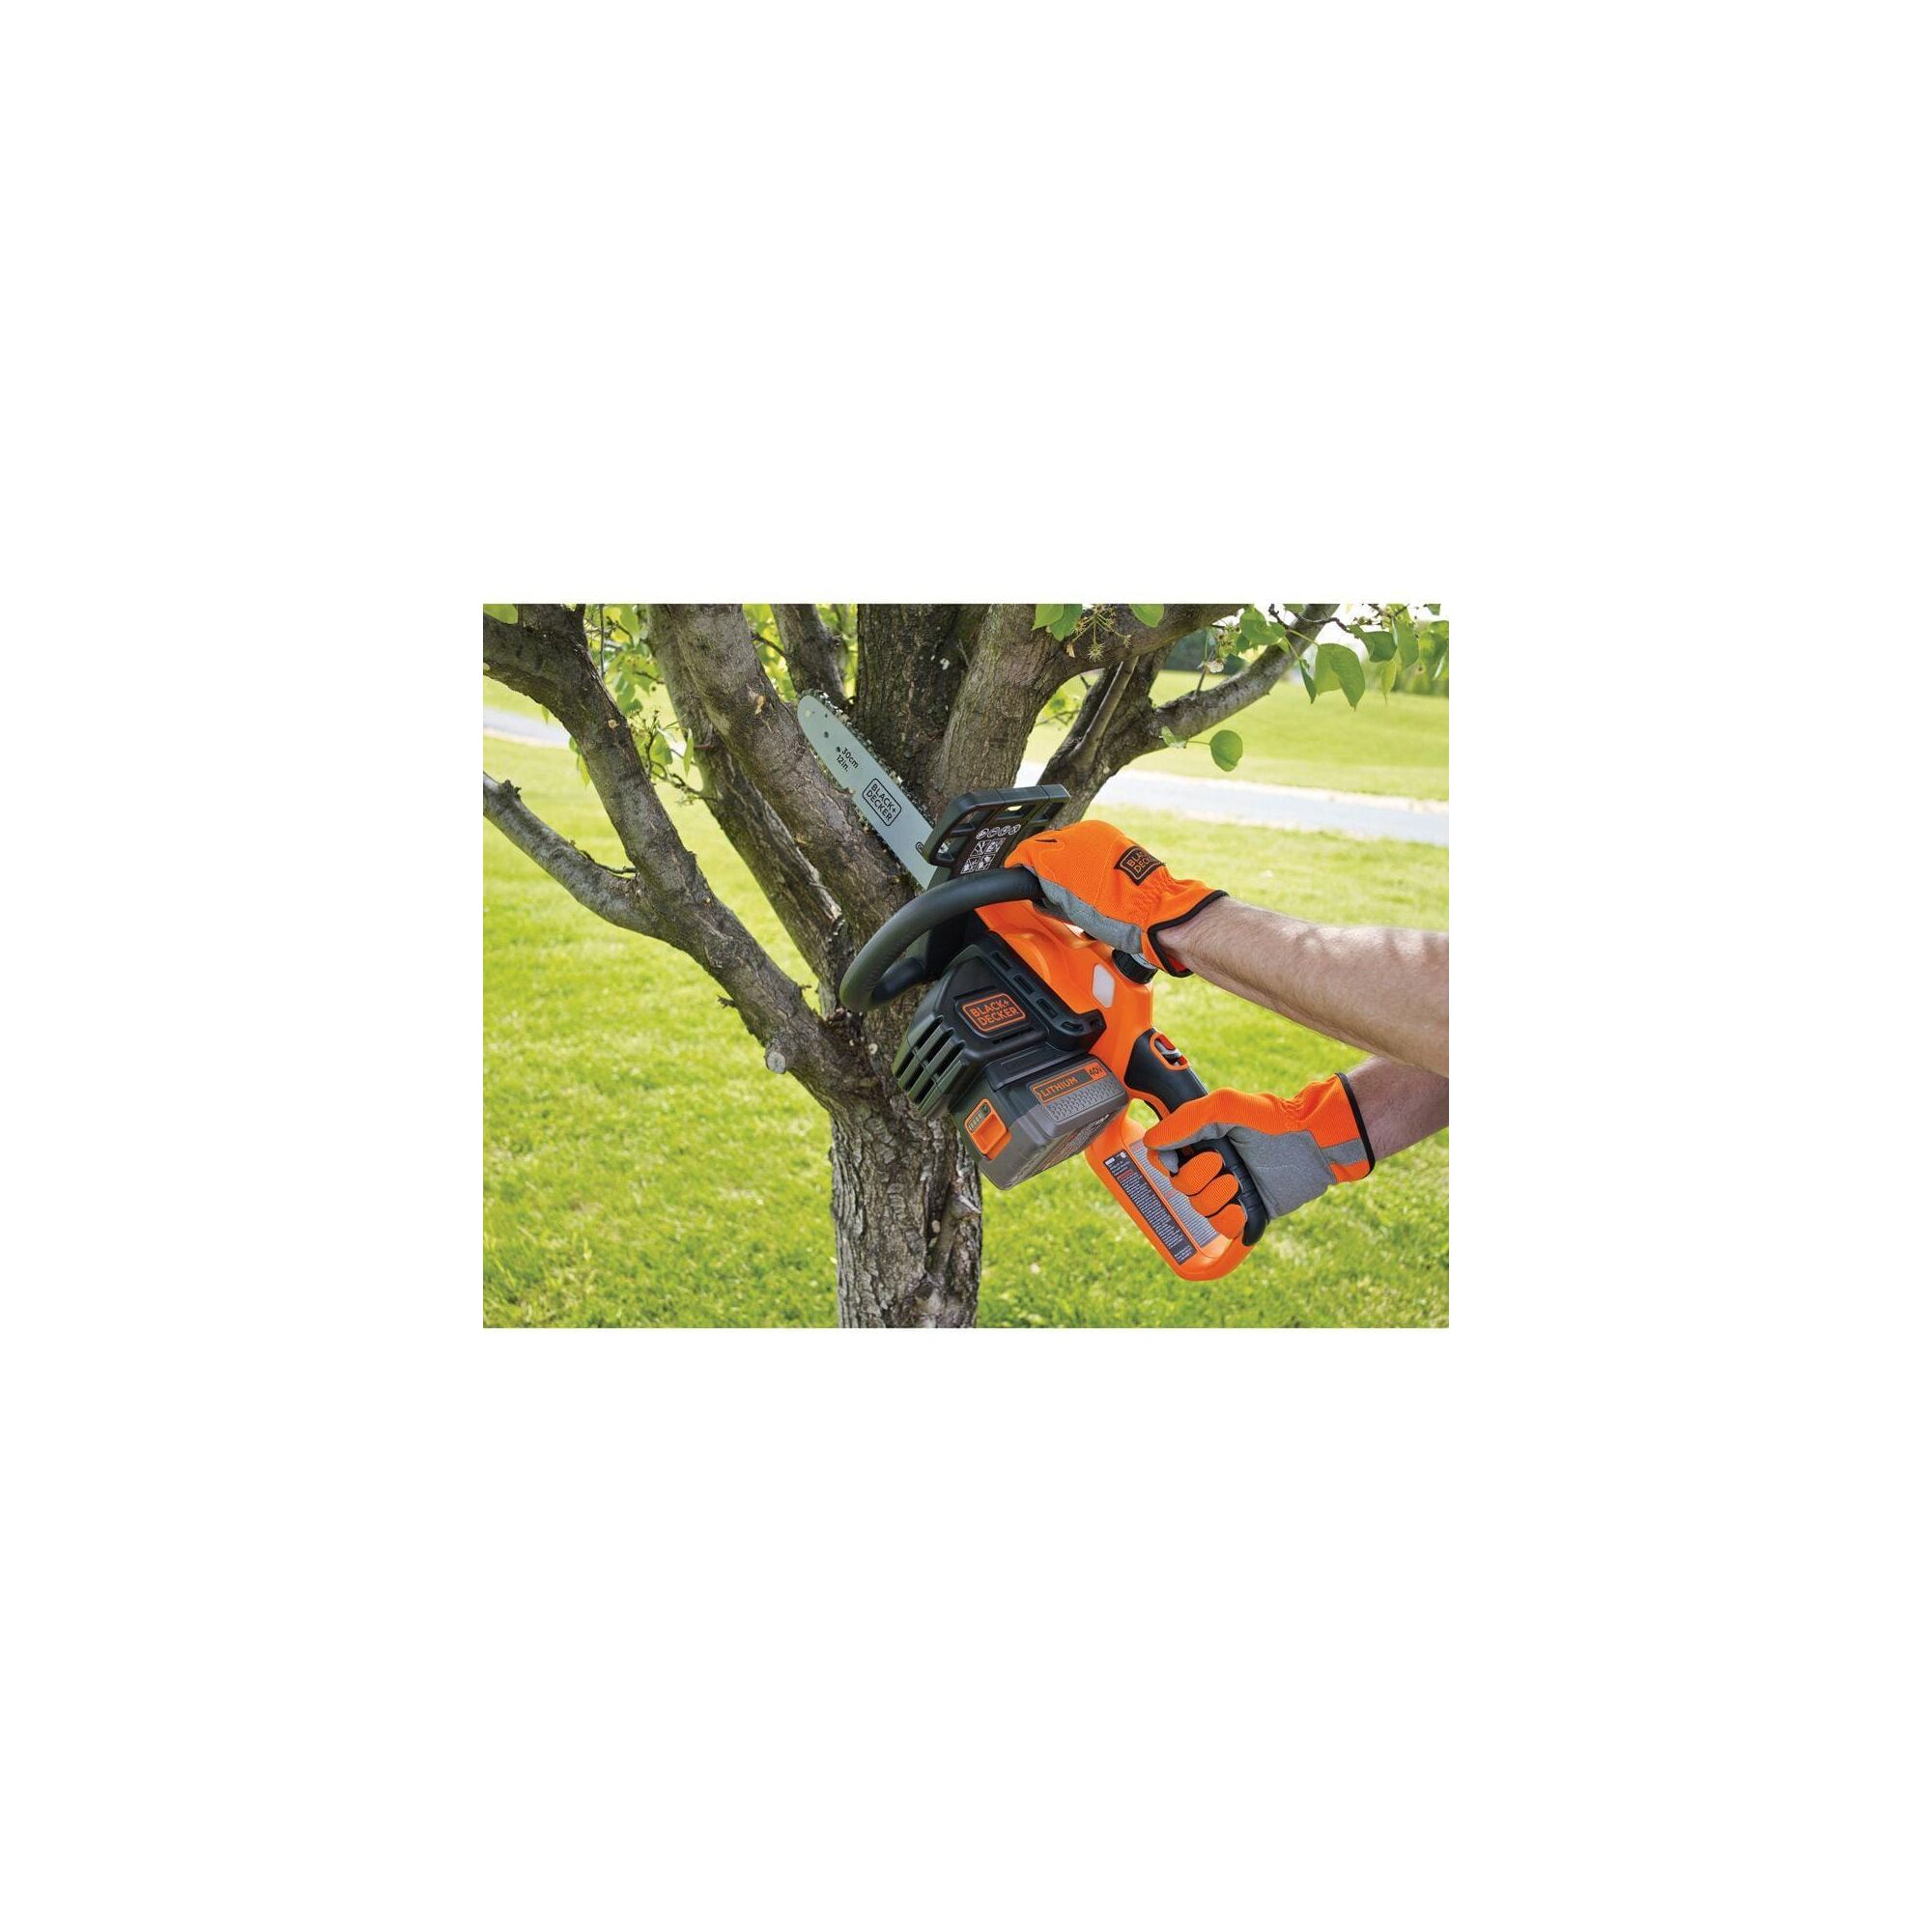 Person using chainsaw to cut tree limbs